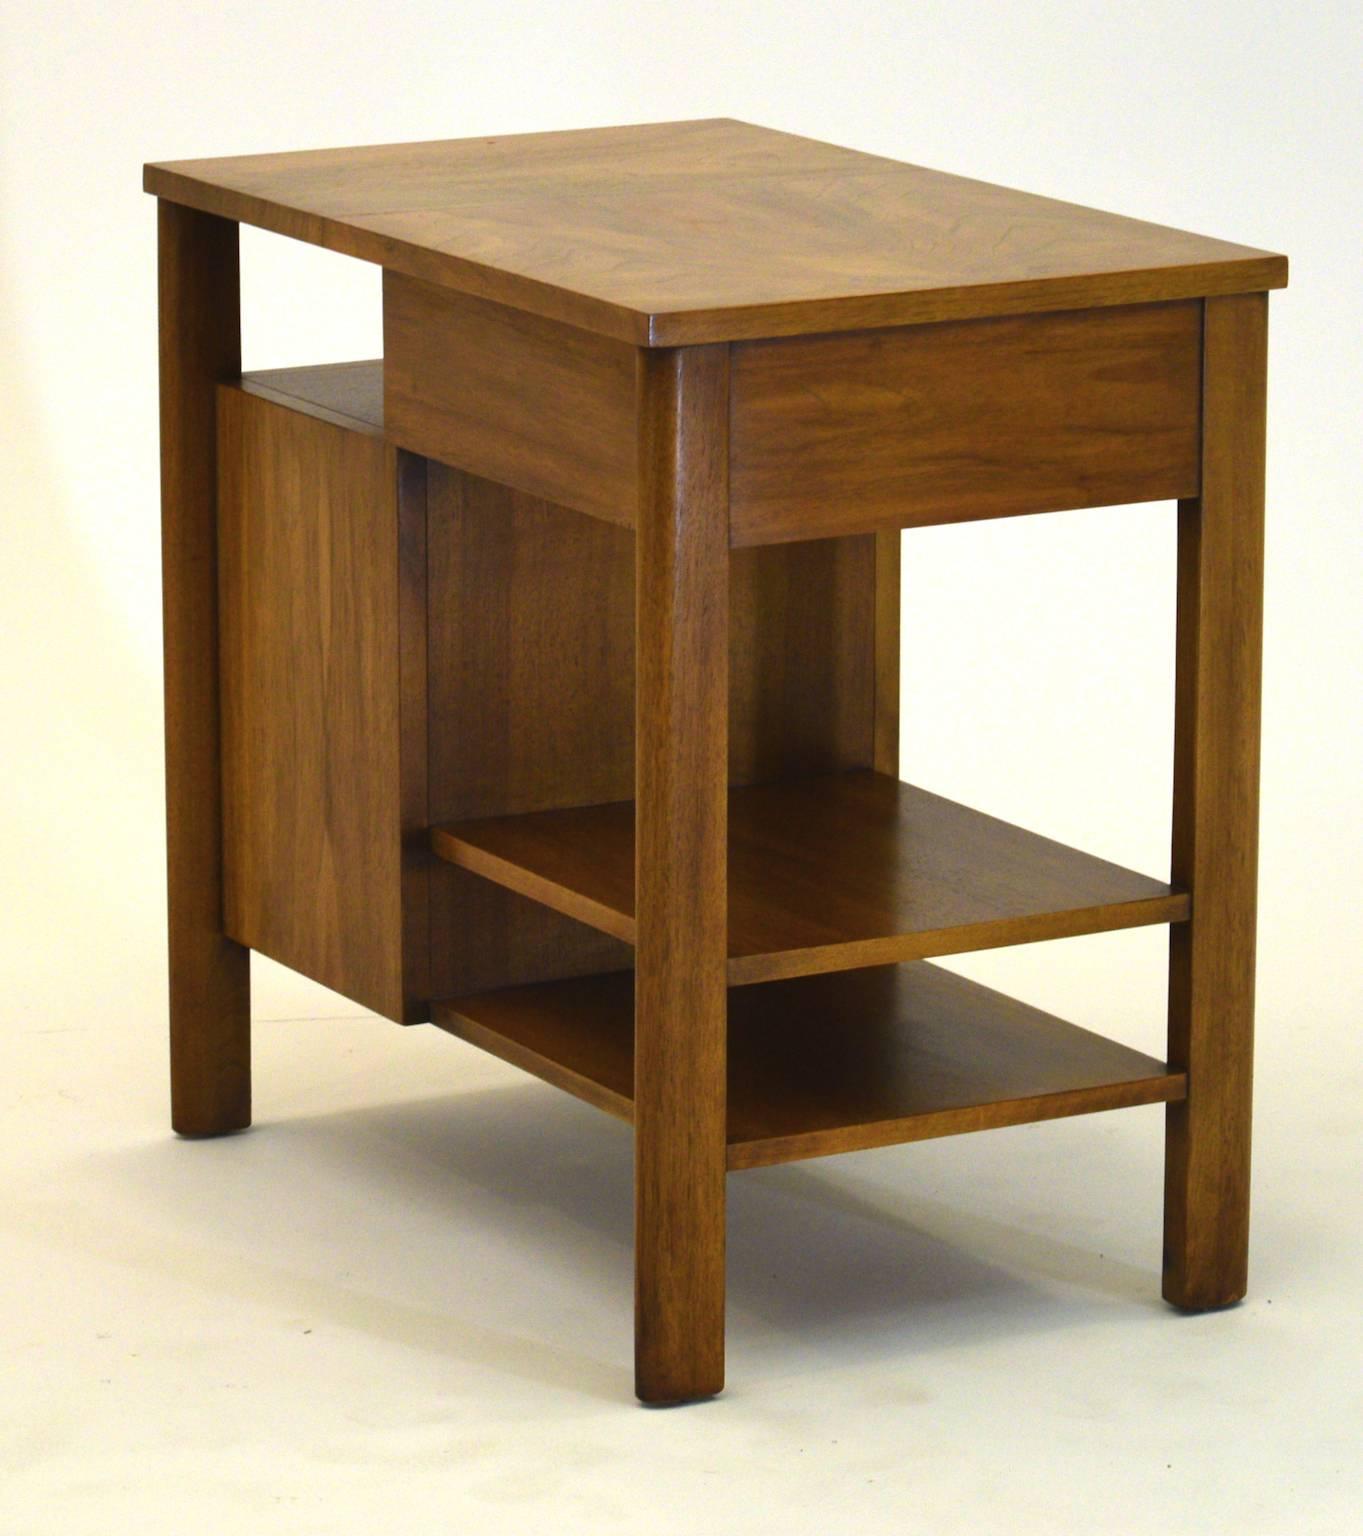 Widdicomb, circa 1951
Walnut.
Likely designed by Dale Ford
Measures 24